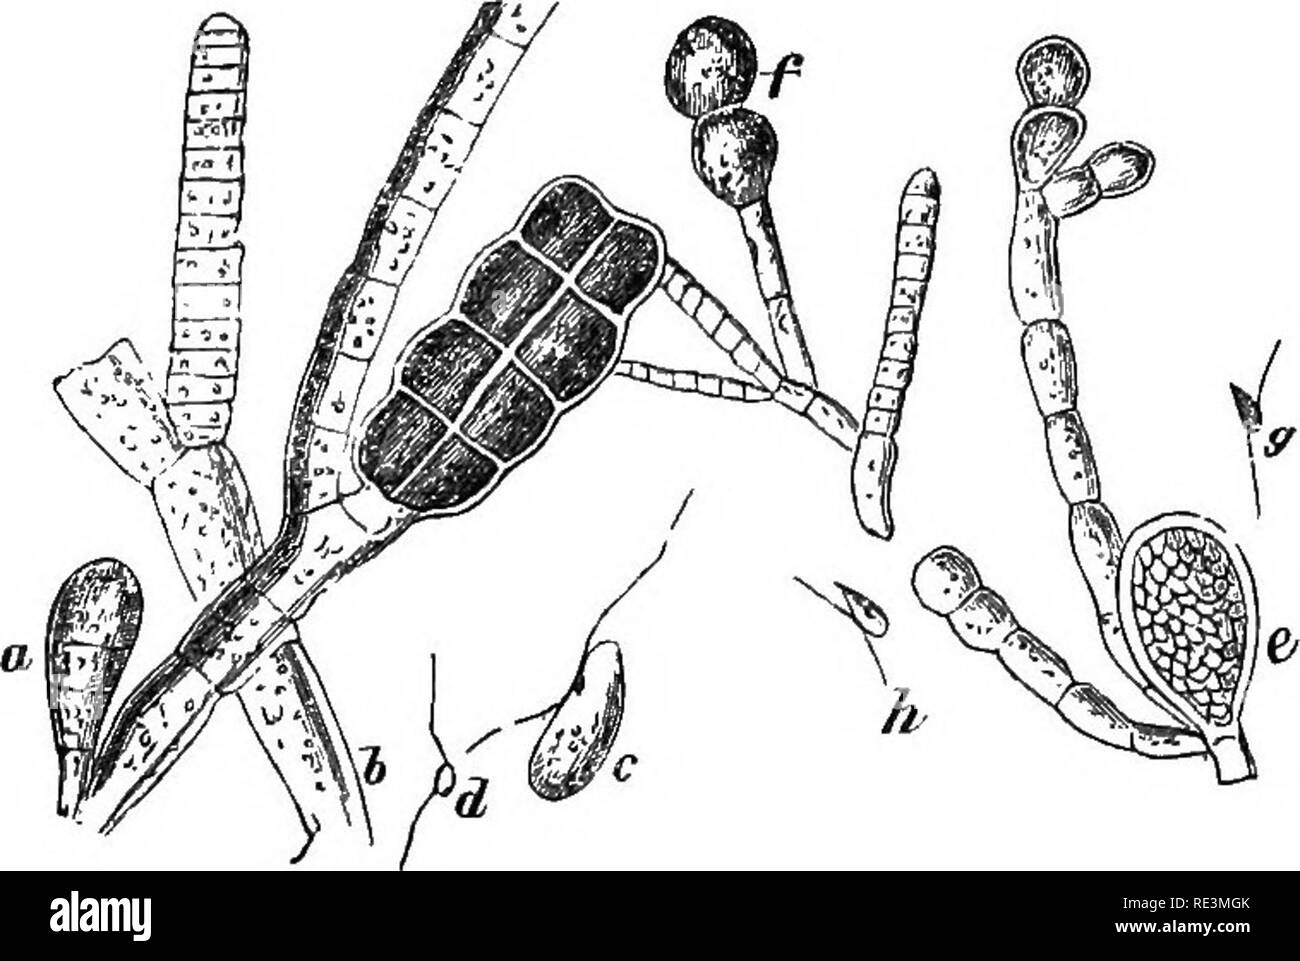 . Introduction to cryptogamic botany. Cryptogams. INTRODUCTION TO CRYPTOGAMIC BOTANY. 209. Fig. 52. a. Cuthria midtifida, fruit with 8 cells, producing large zoospores. b. Fruit with 32 cells, producing spermatozoids. c. Zoospore. d. Spermatozoid. e. Oosporangium of SHlophora rhizodes. f. Trichosporangium of ditto. ff. Small zoospore from Oosporangium. h. Larger zoospore from Trichosporangium. All magnified, after Thuret. 193. The divisions into which this great class naturally breaks up are the following: Ectocarpew, Chordarice, Dictyo- tece, LaminaricB, Sporochnacece, and Fucacece, of which  Stock Photo